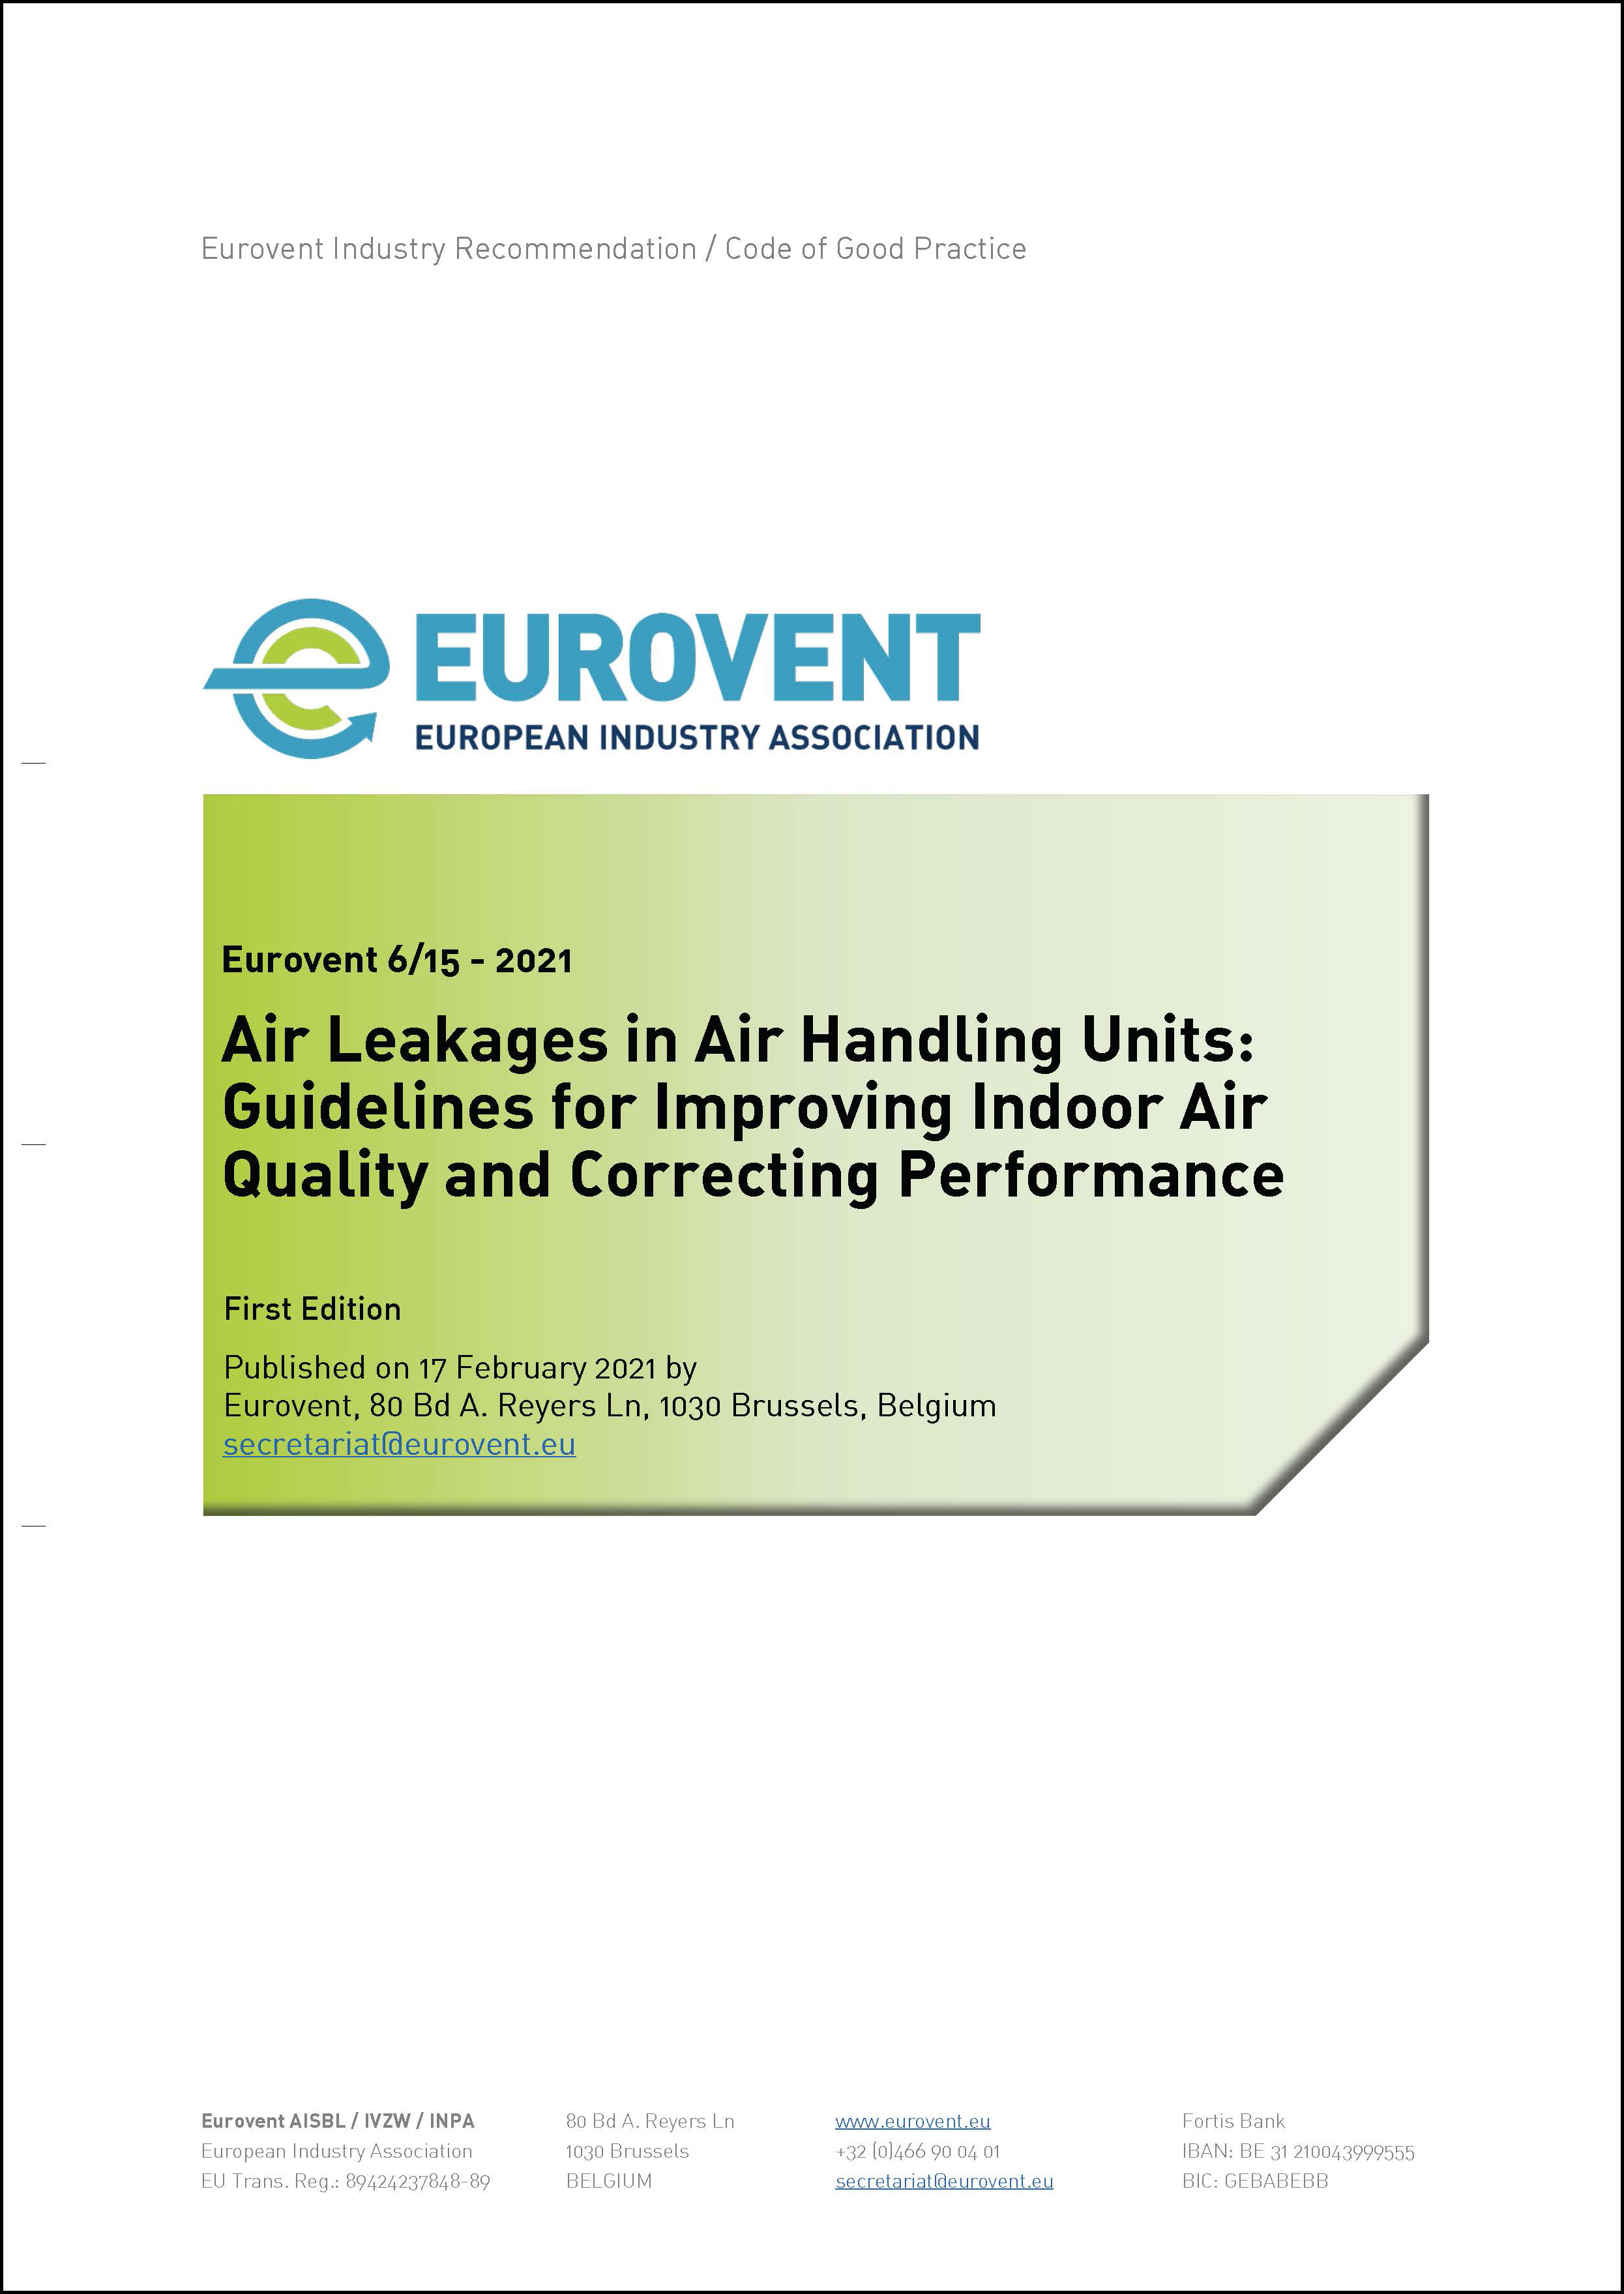 Eurovent 6/15 - 2021: Air Leakages in Air Handling Units - First Edition